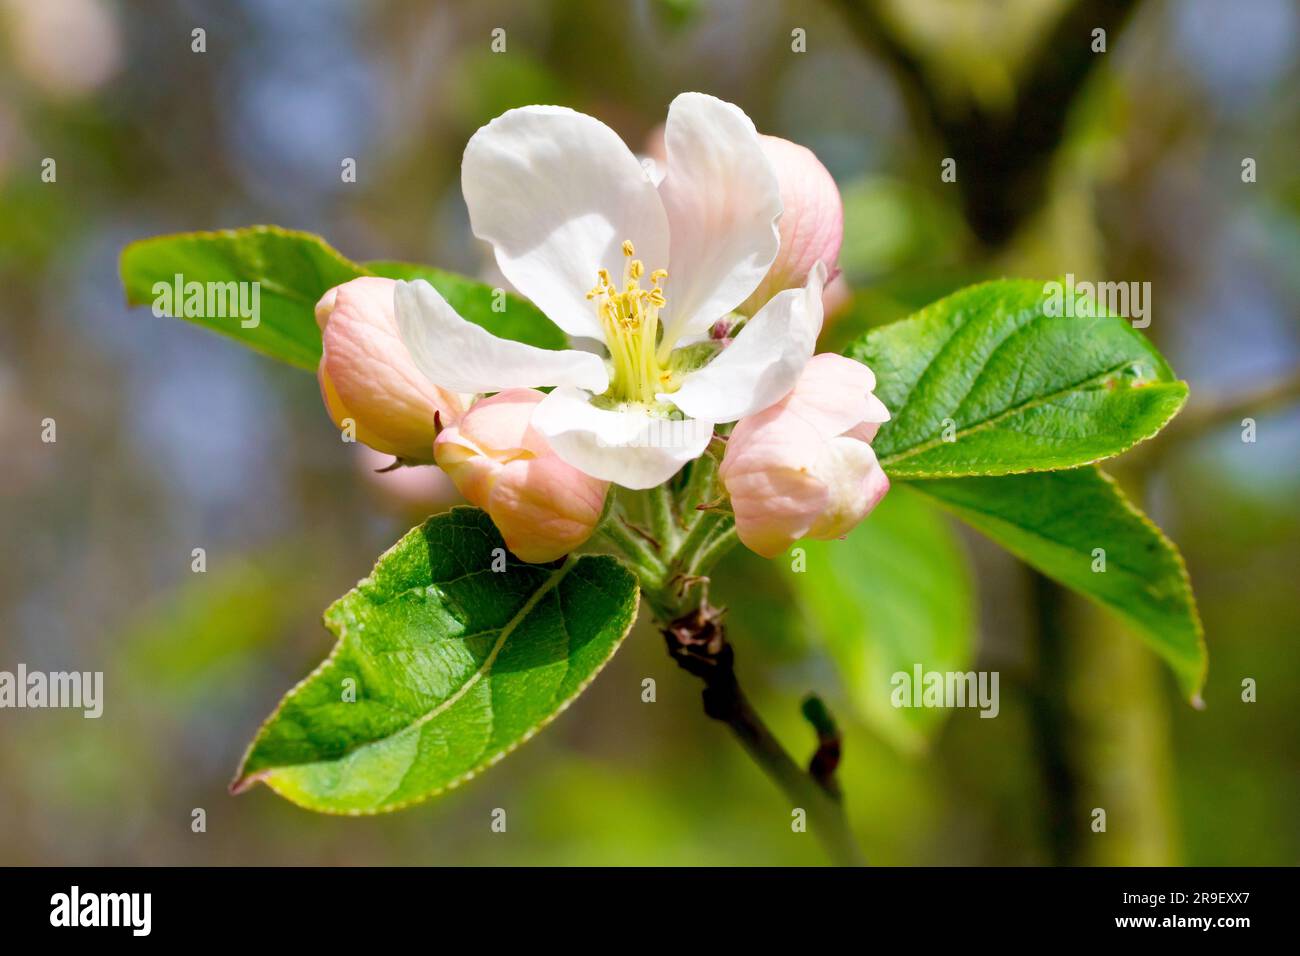 Crab Apple (malus sylvestris), close up of a single flower or blossom appearing on the common tree in the spring sunshine. Stock Photo